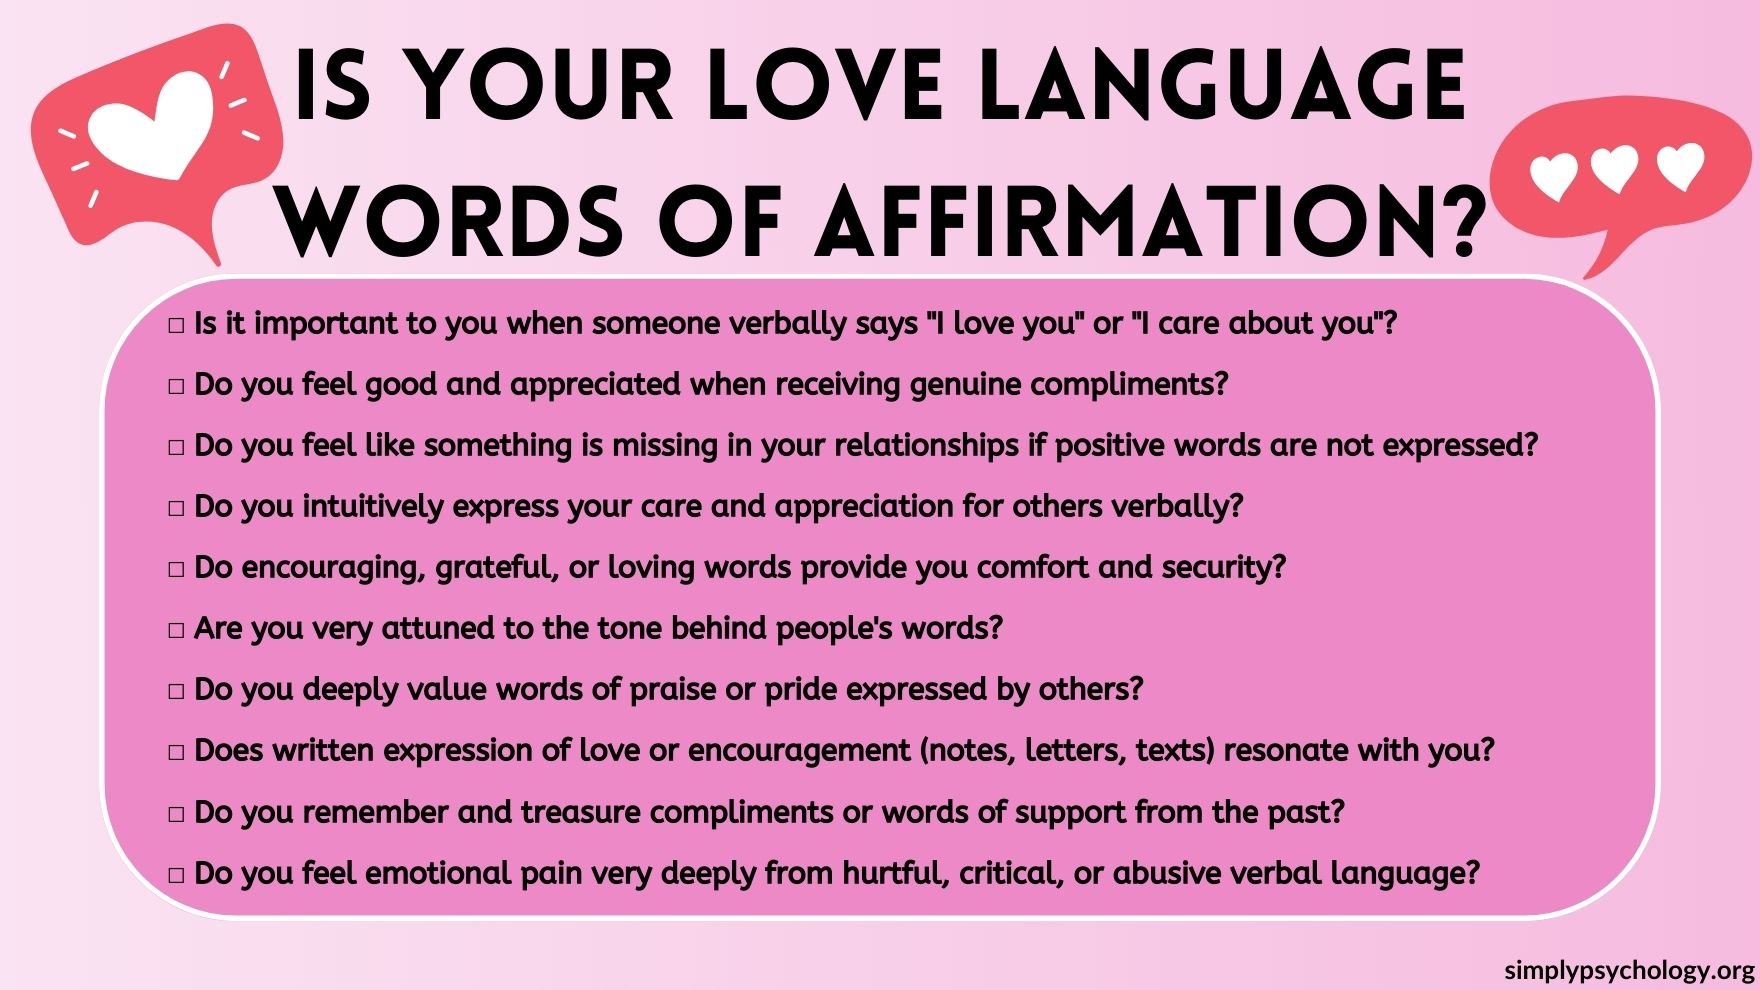 a checklist of words of affirmation questions to find out if this is your love language